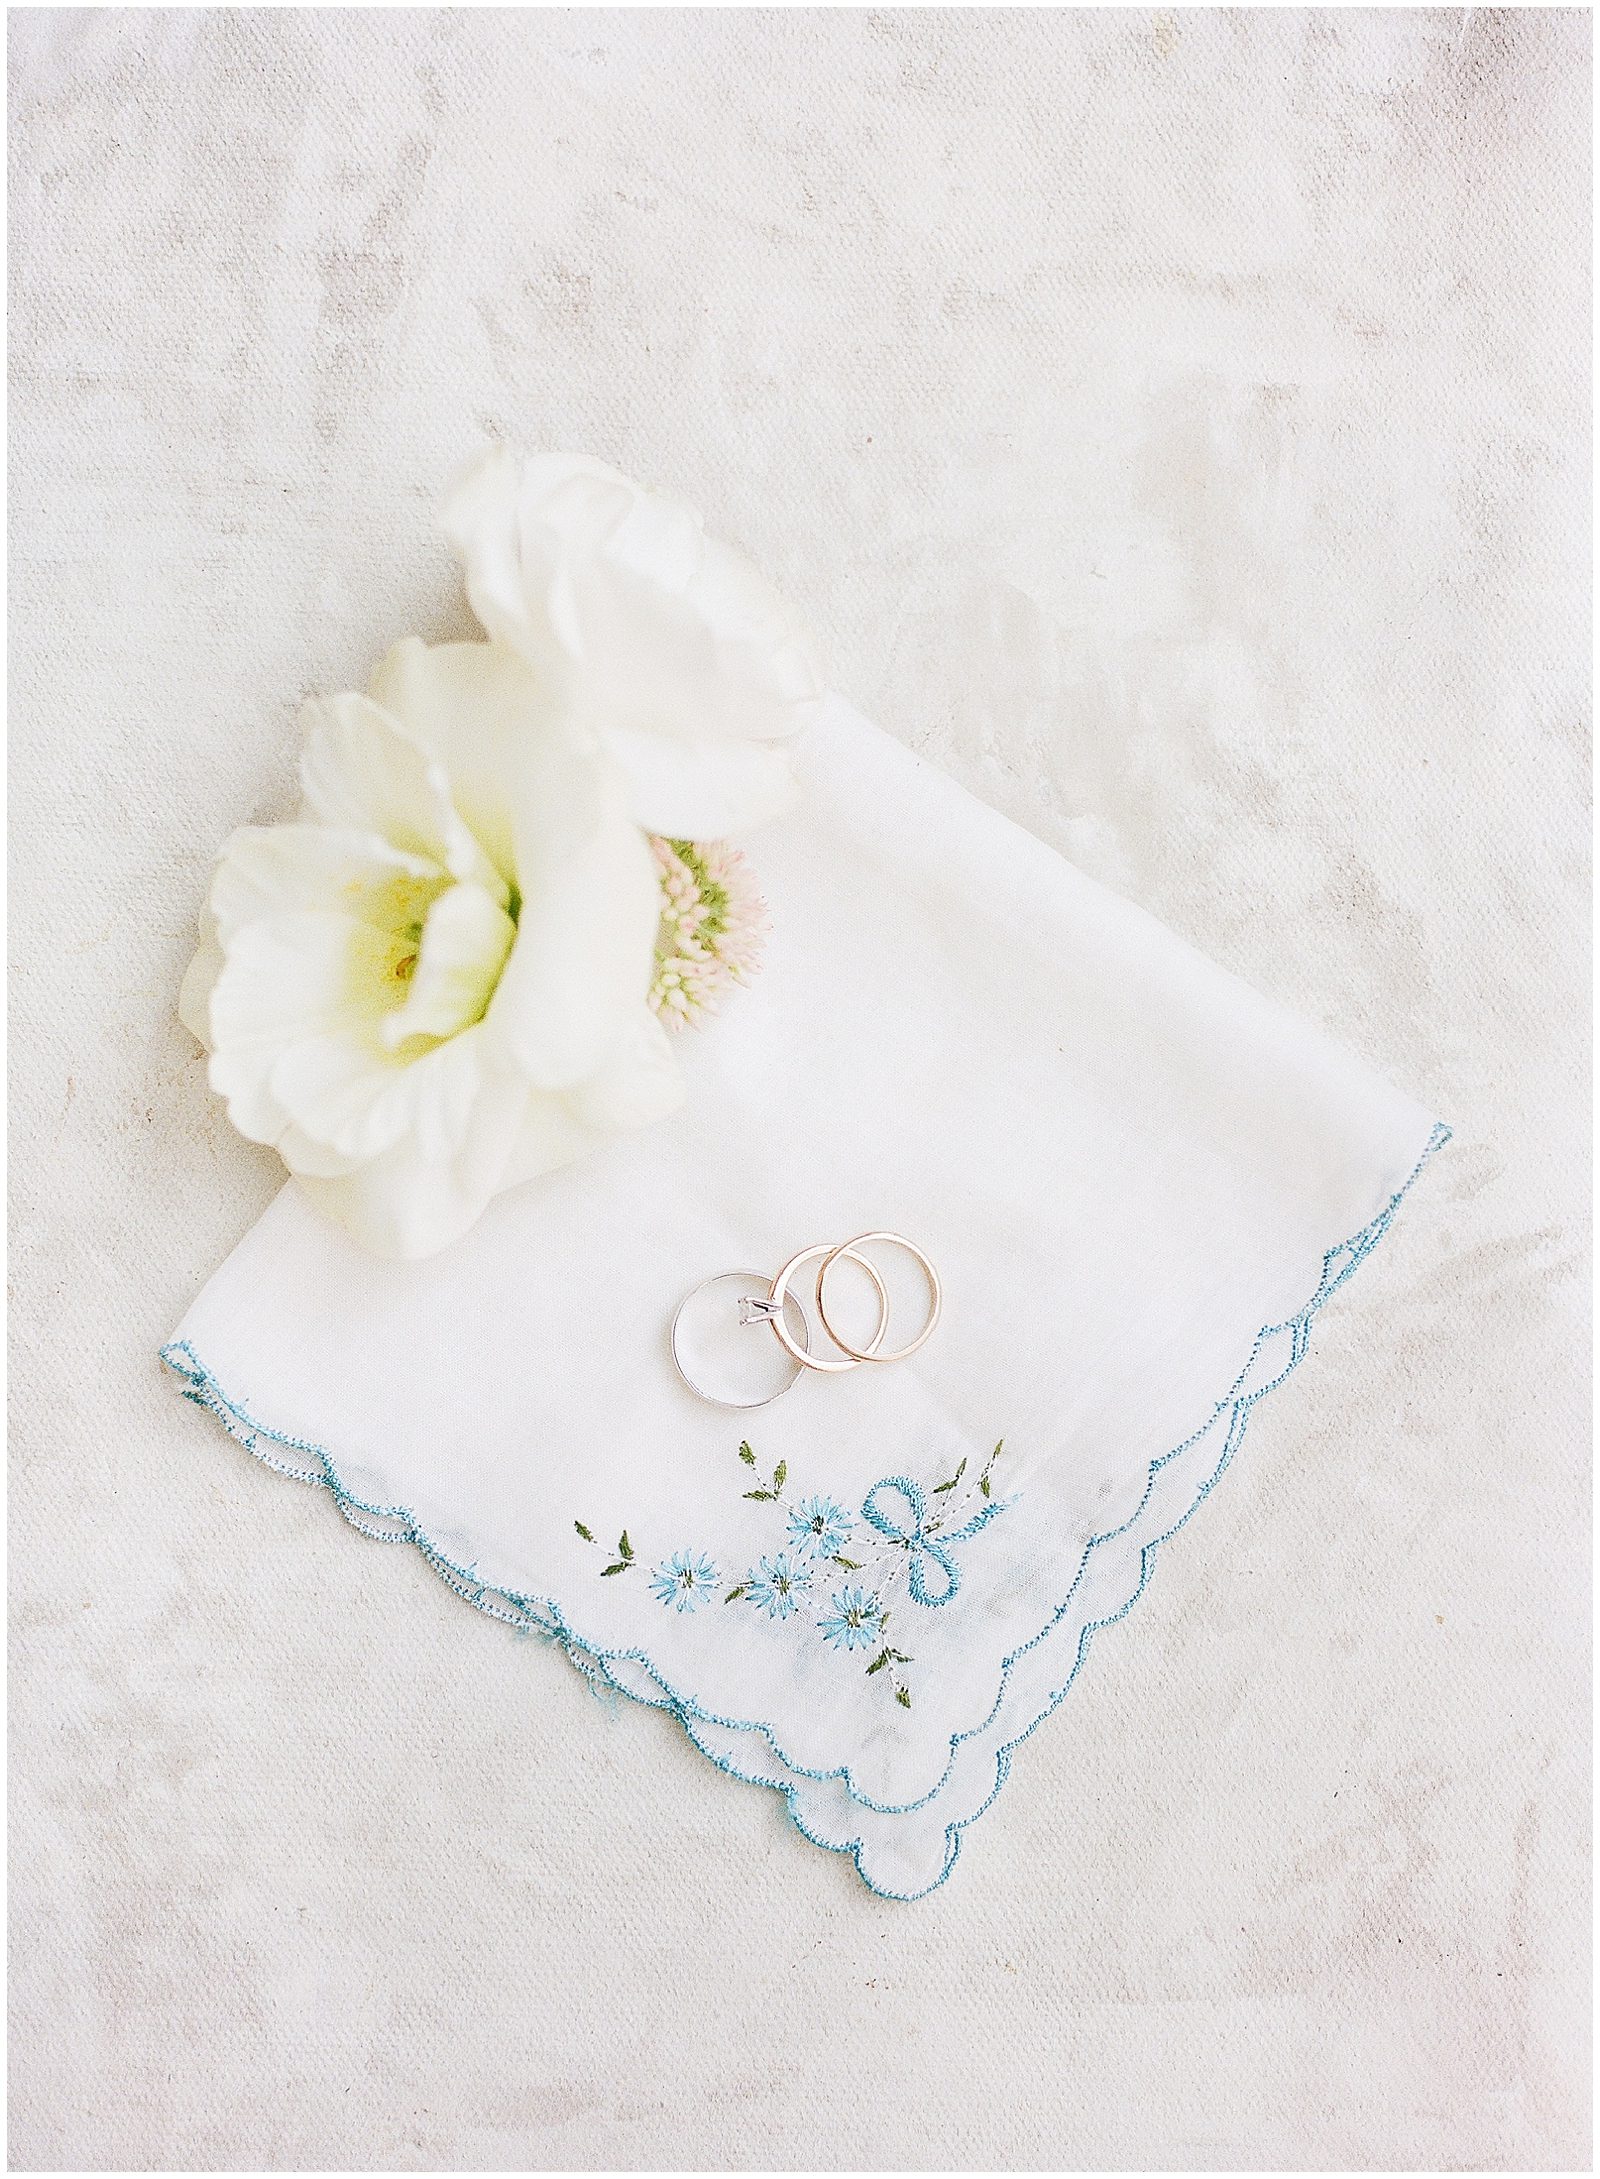 Wedding Details Handkerchief with Flowers and Rings Photo